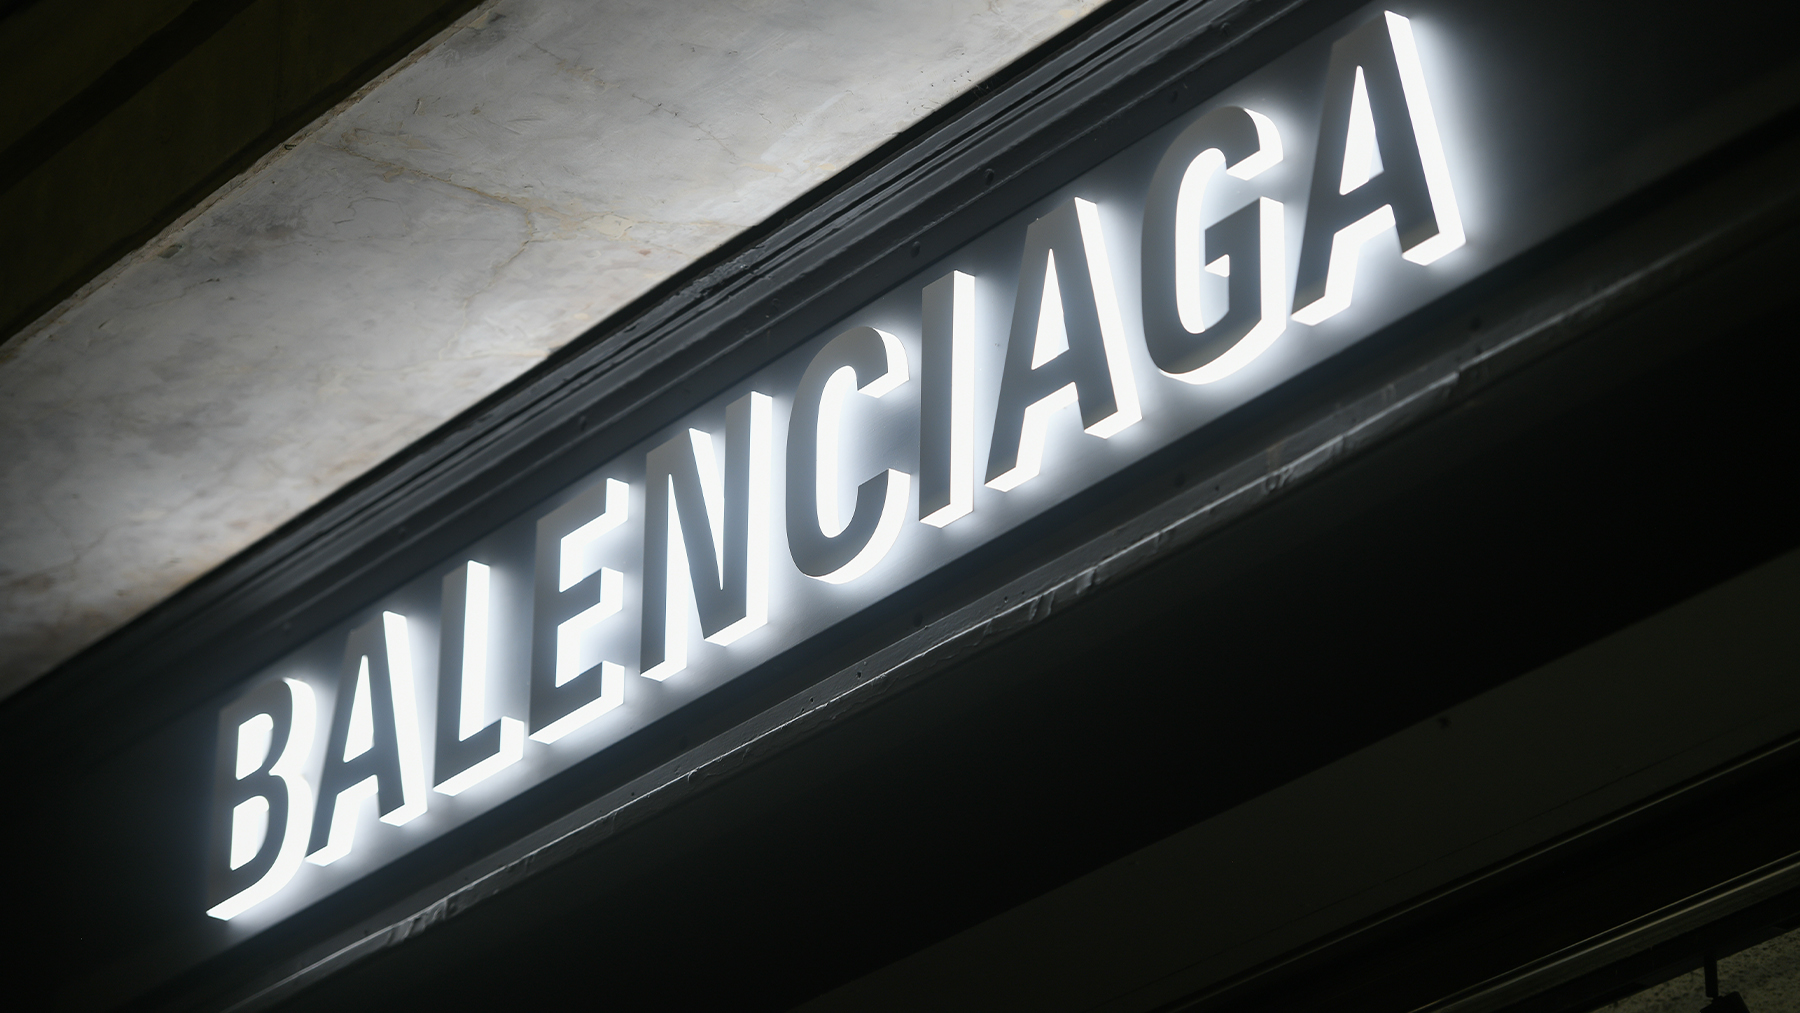 Balenciaga Apologises After Accusations It Sexualised Ads | BoF